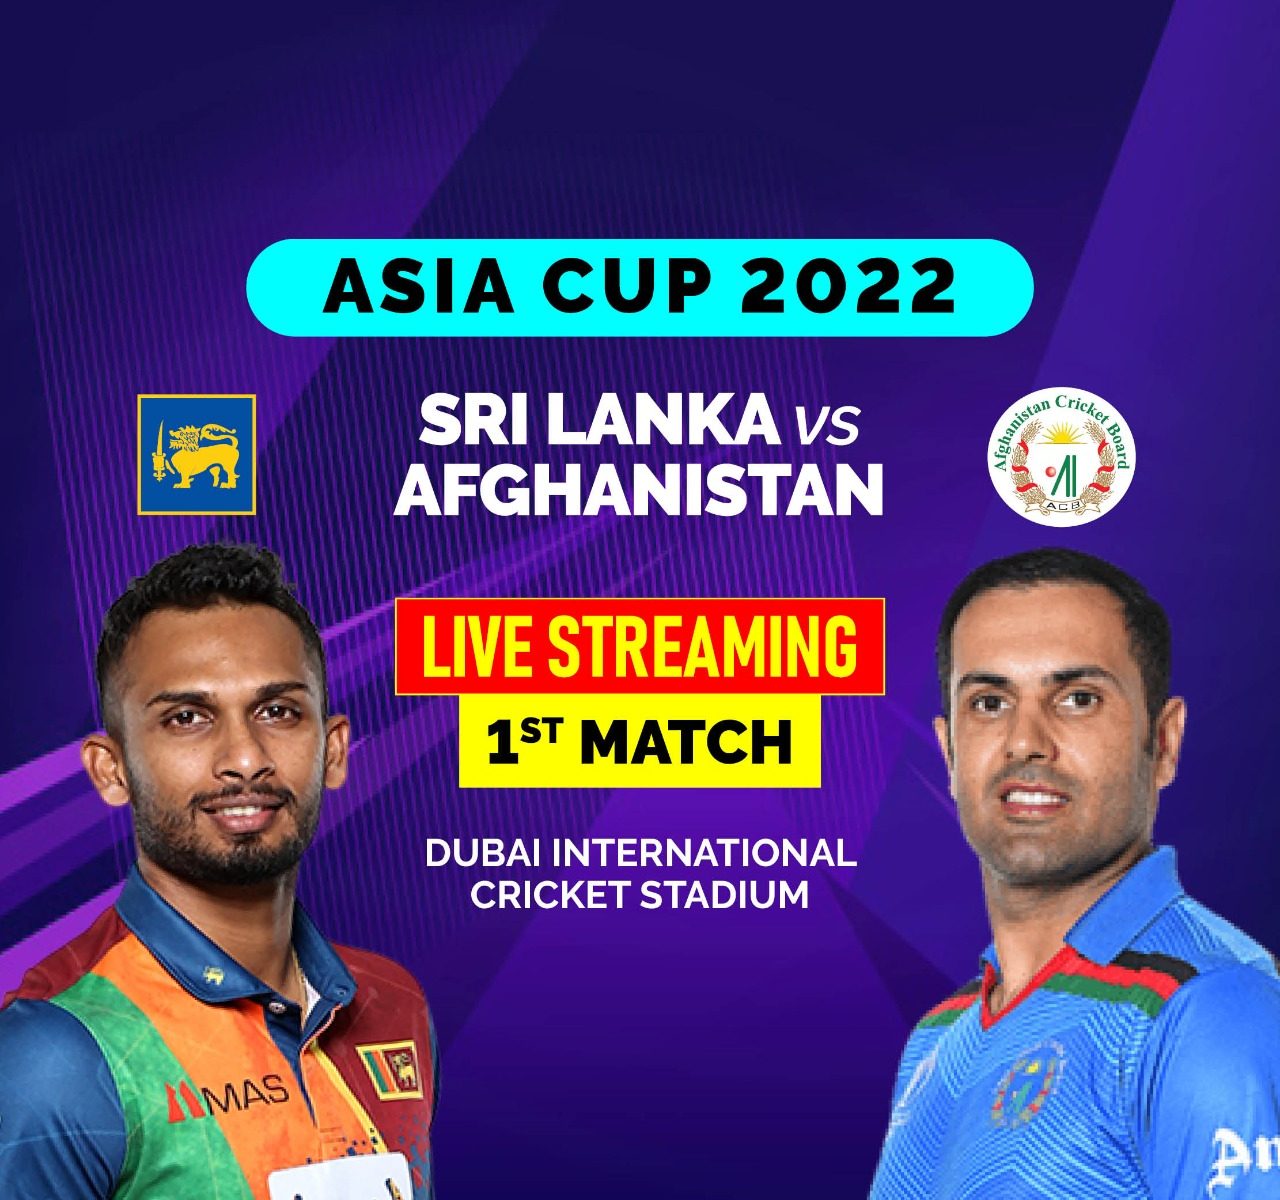 cricket asia cup 2022 live